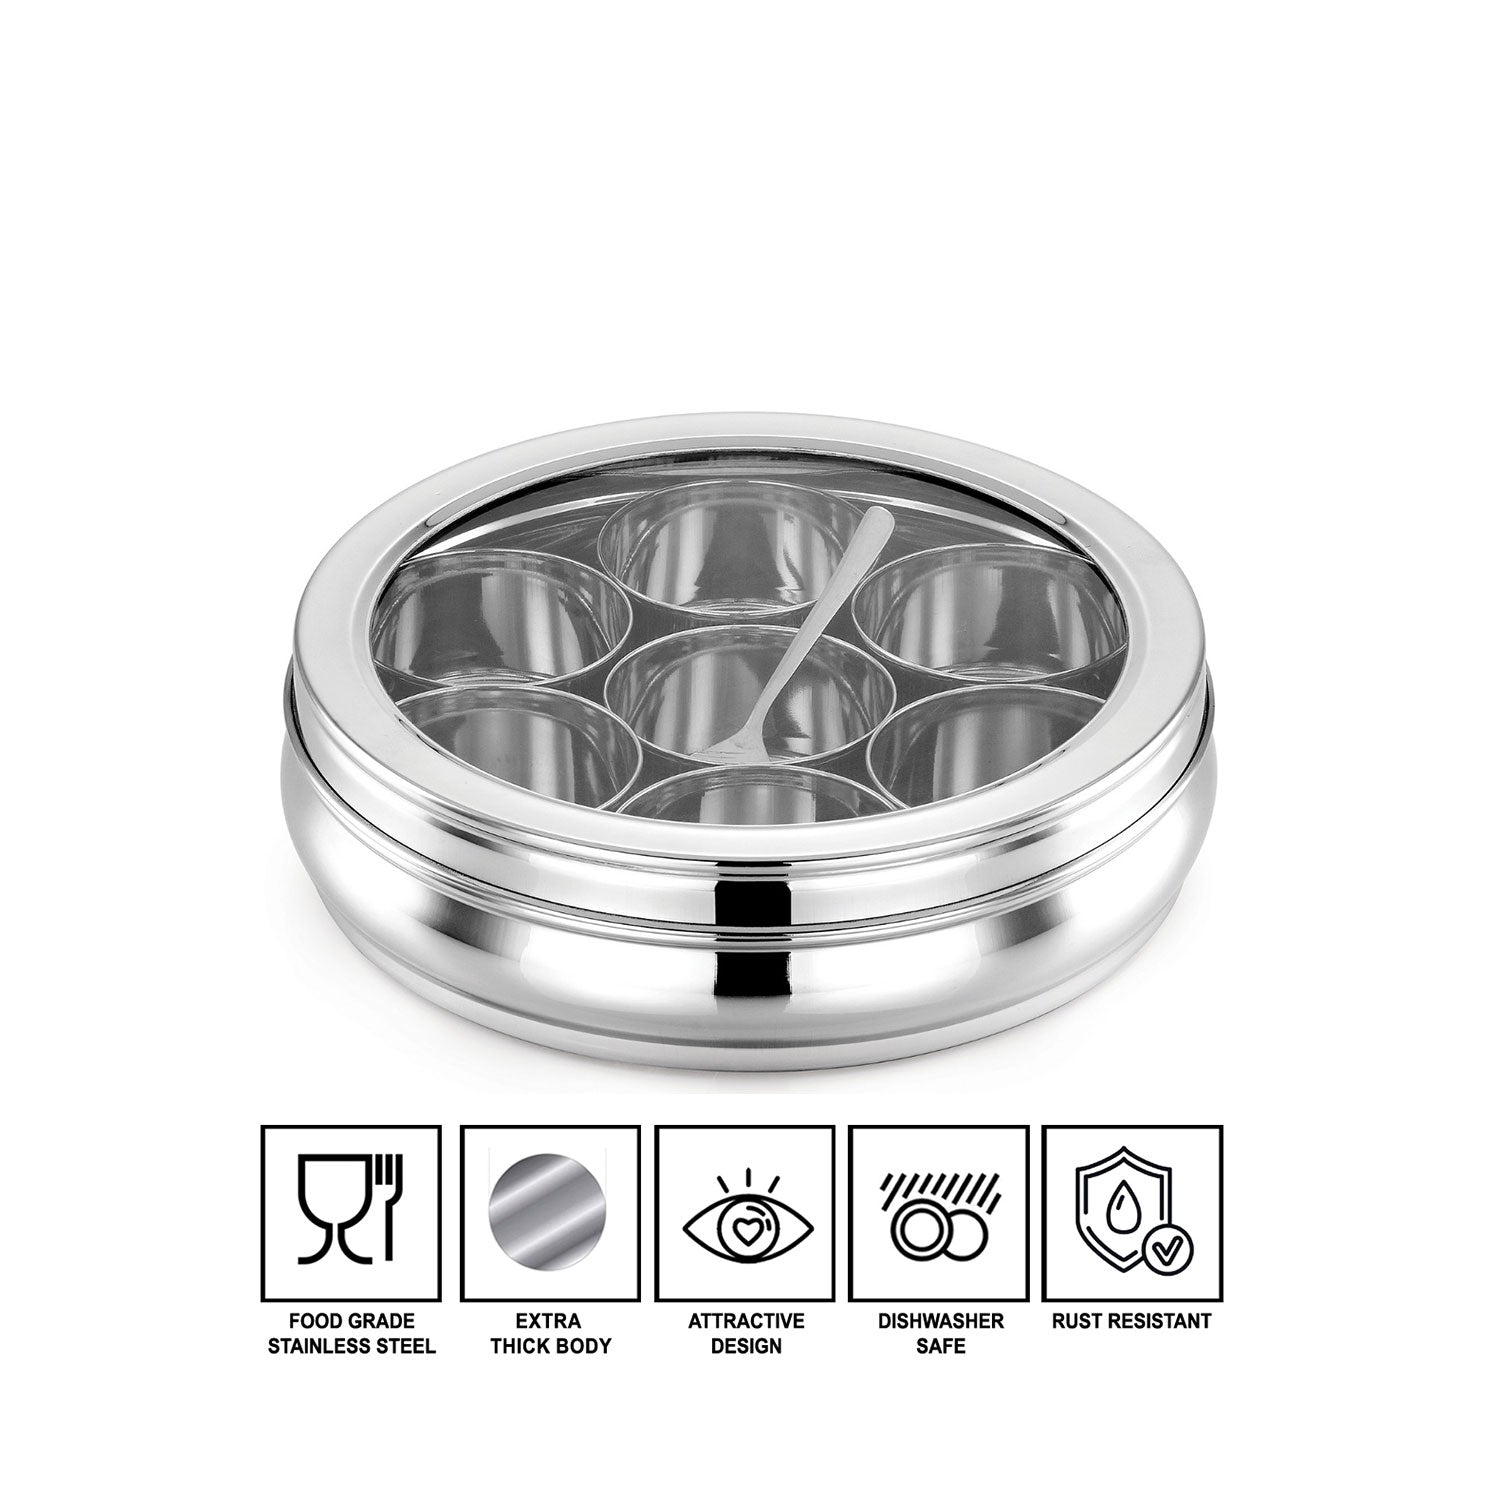 AVIAS Stainless steel Deluxe Spice box features